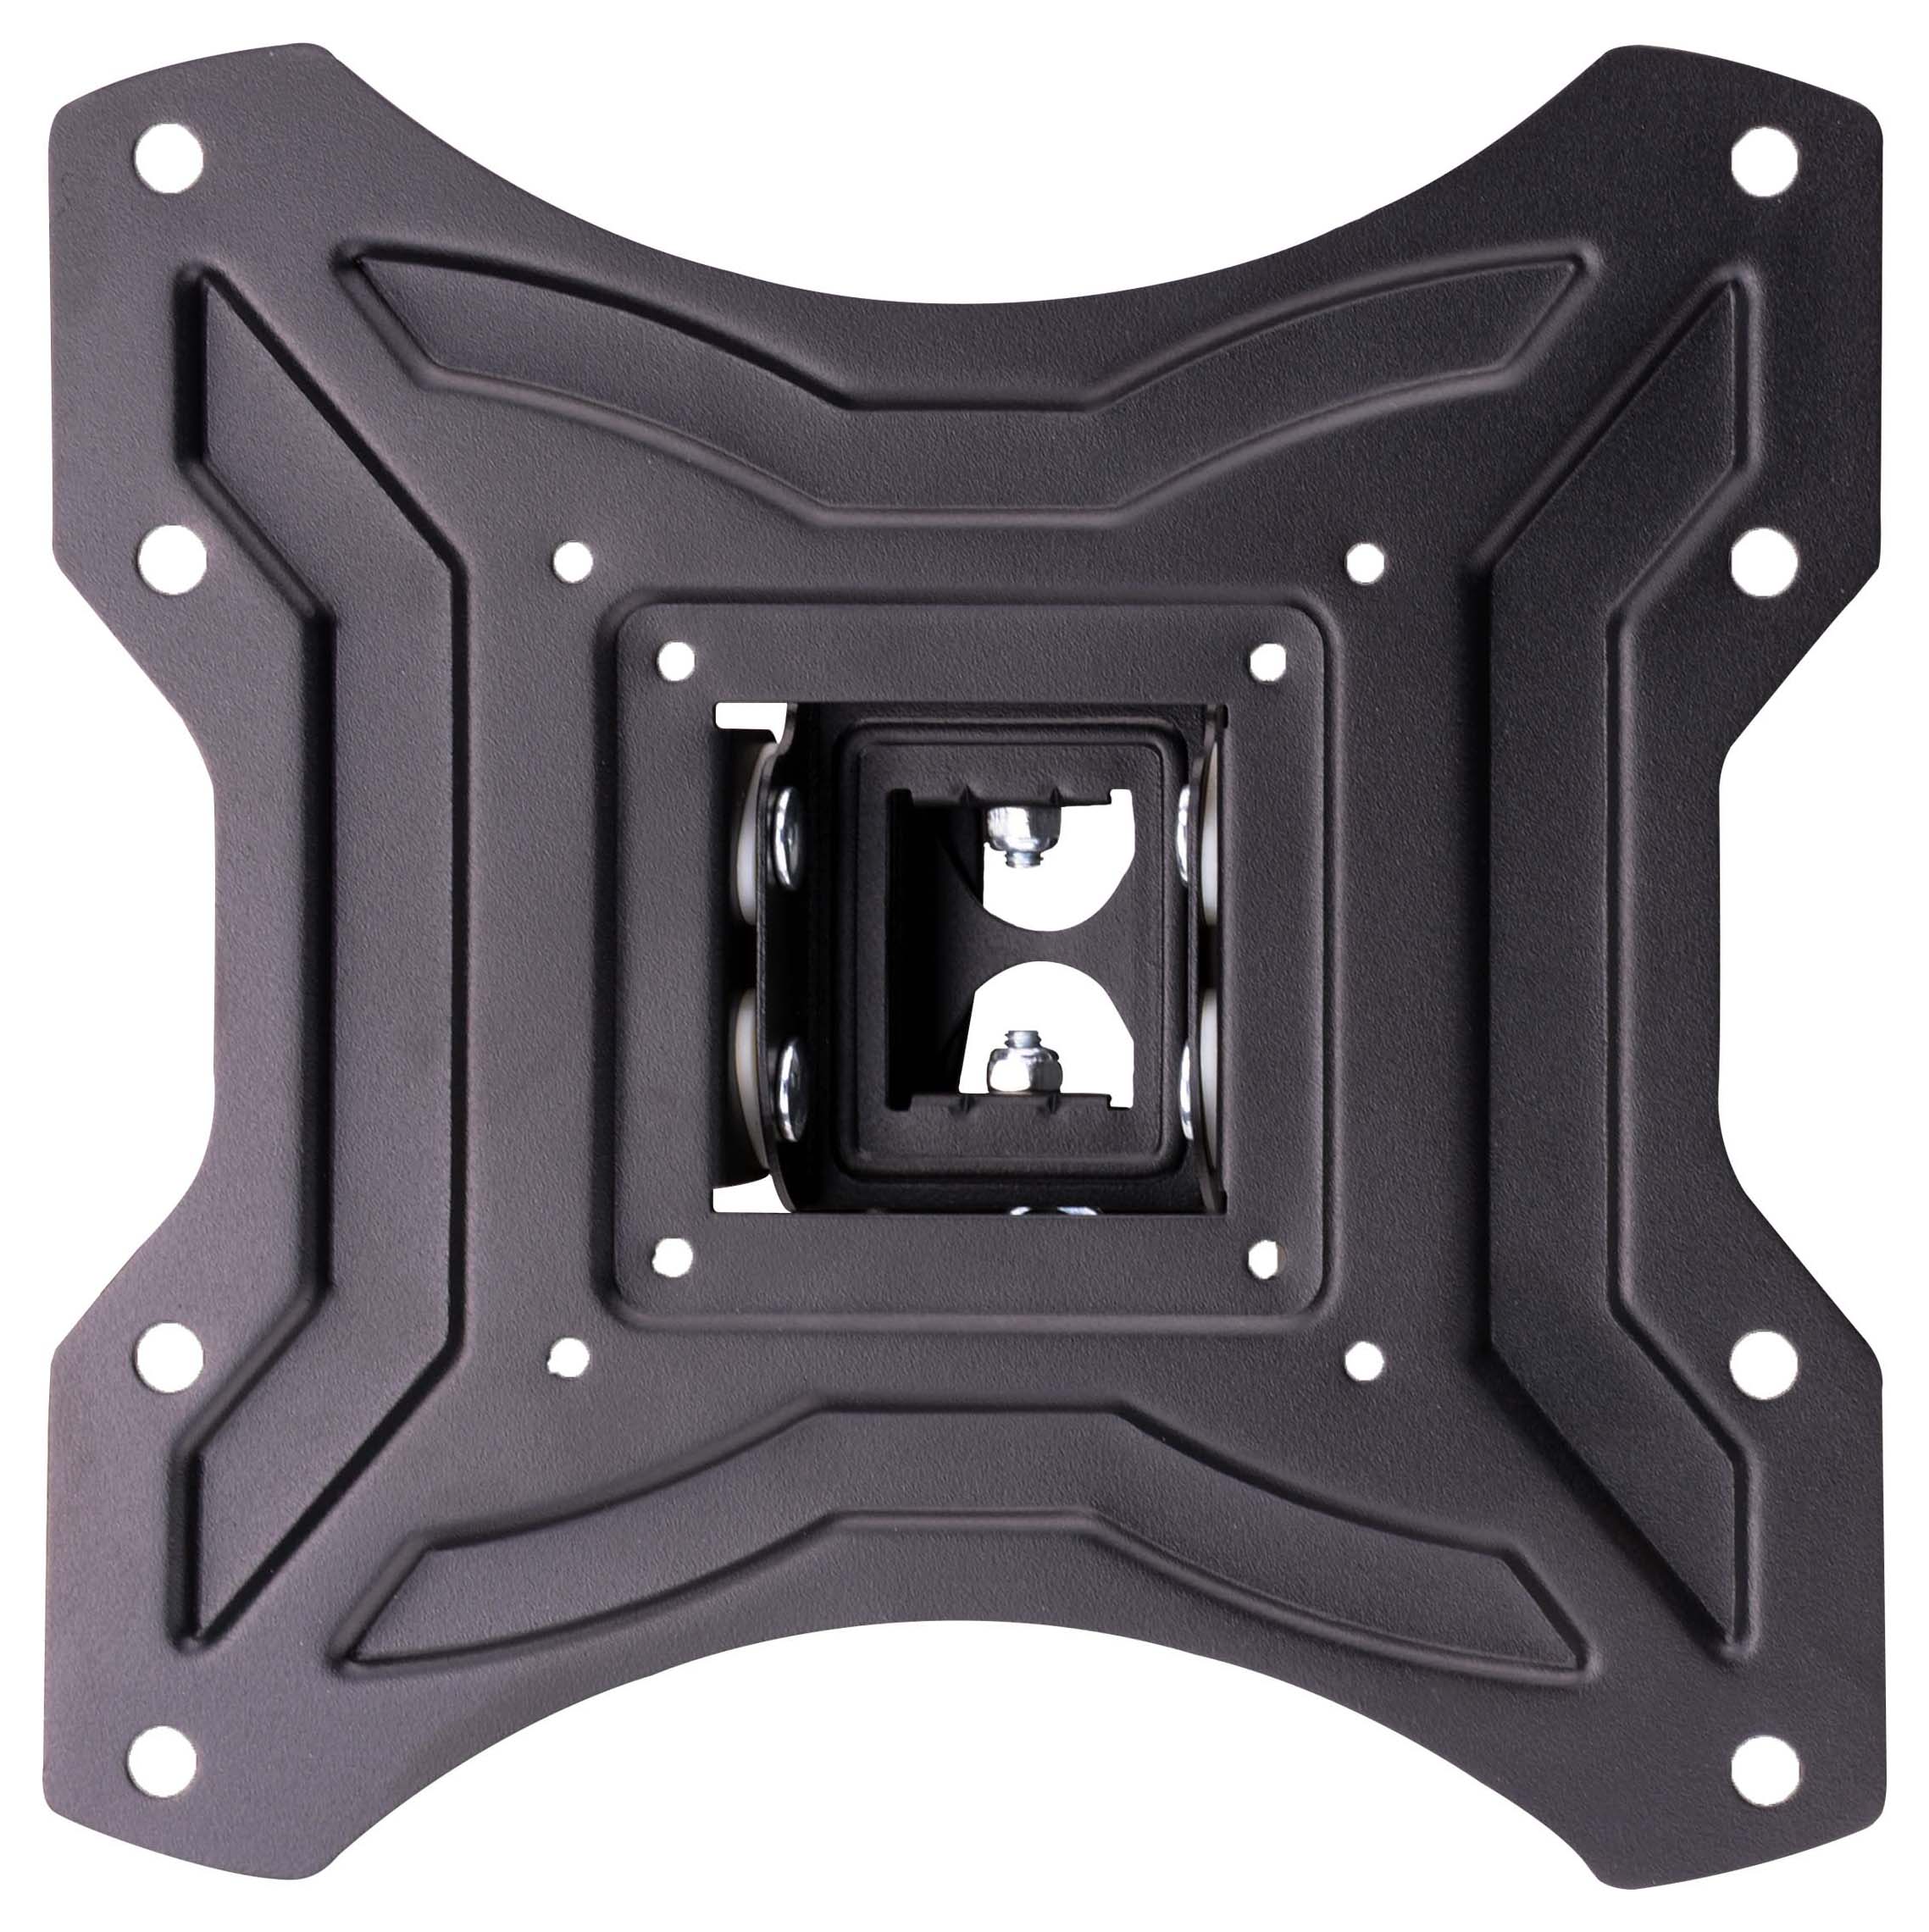 Image of Ross Essentials Tilt and Turn TV Wall Mount Bracket - 23in to 50in